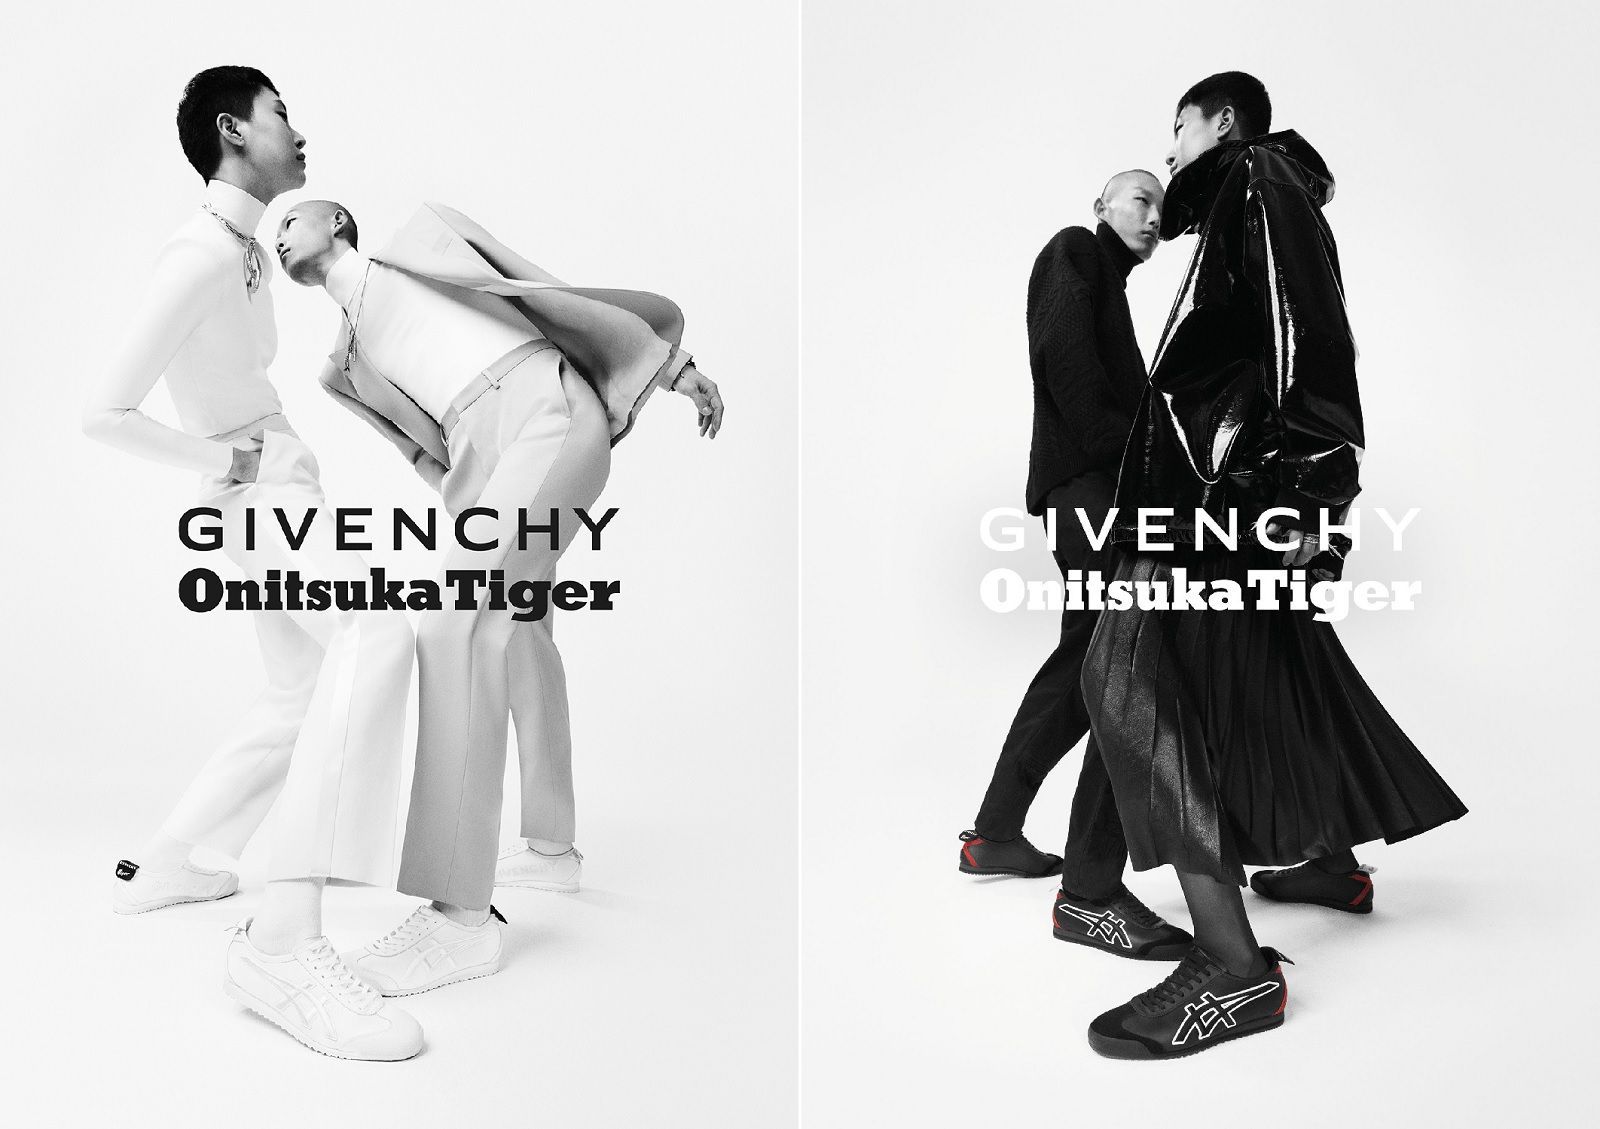 Givenchy announces the collaboration with Onitsuka Tiger